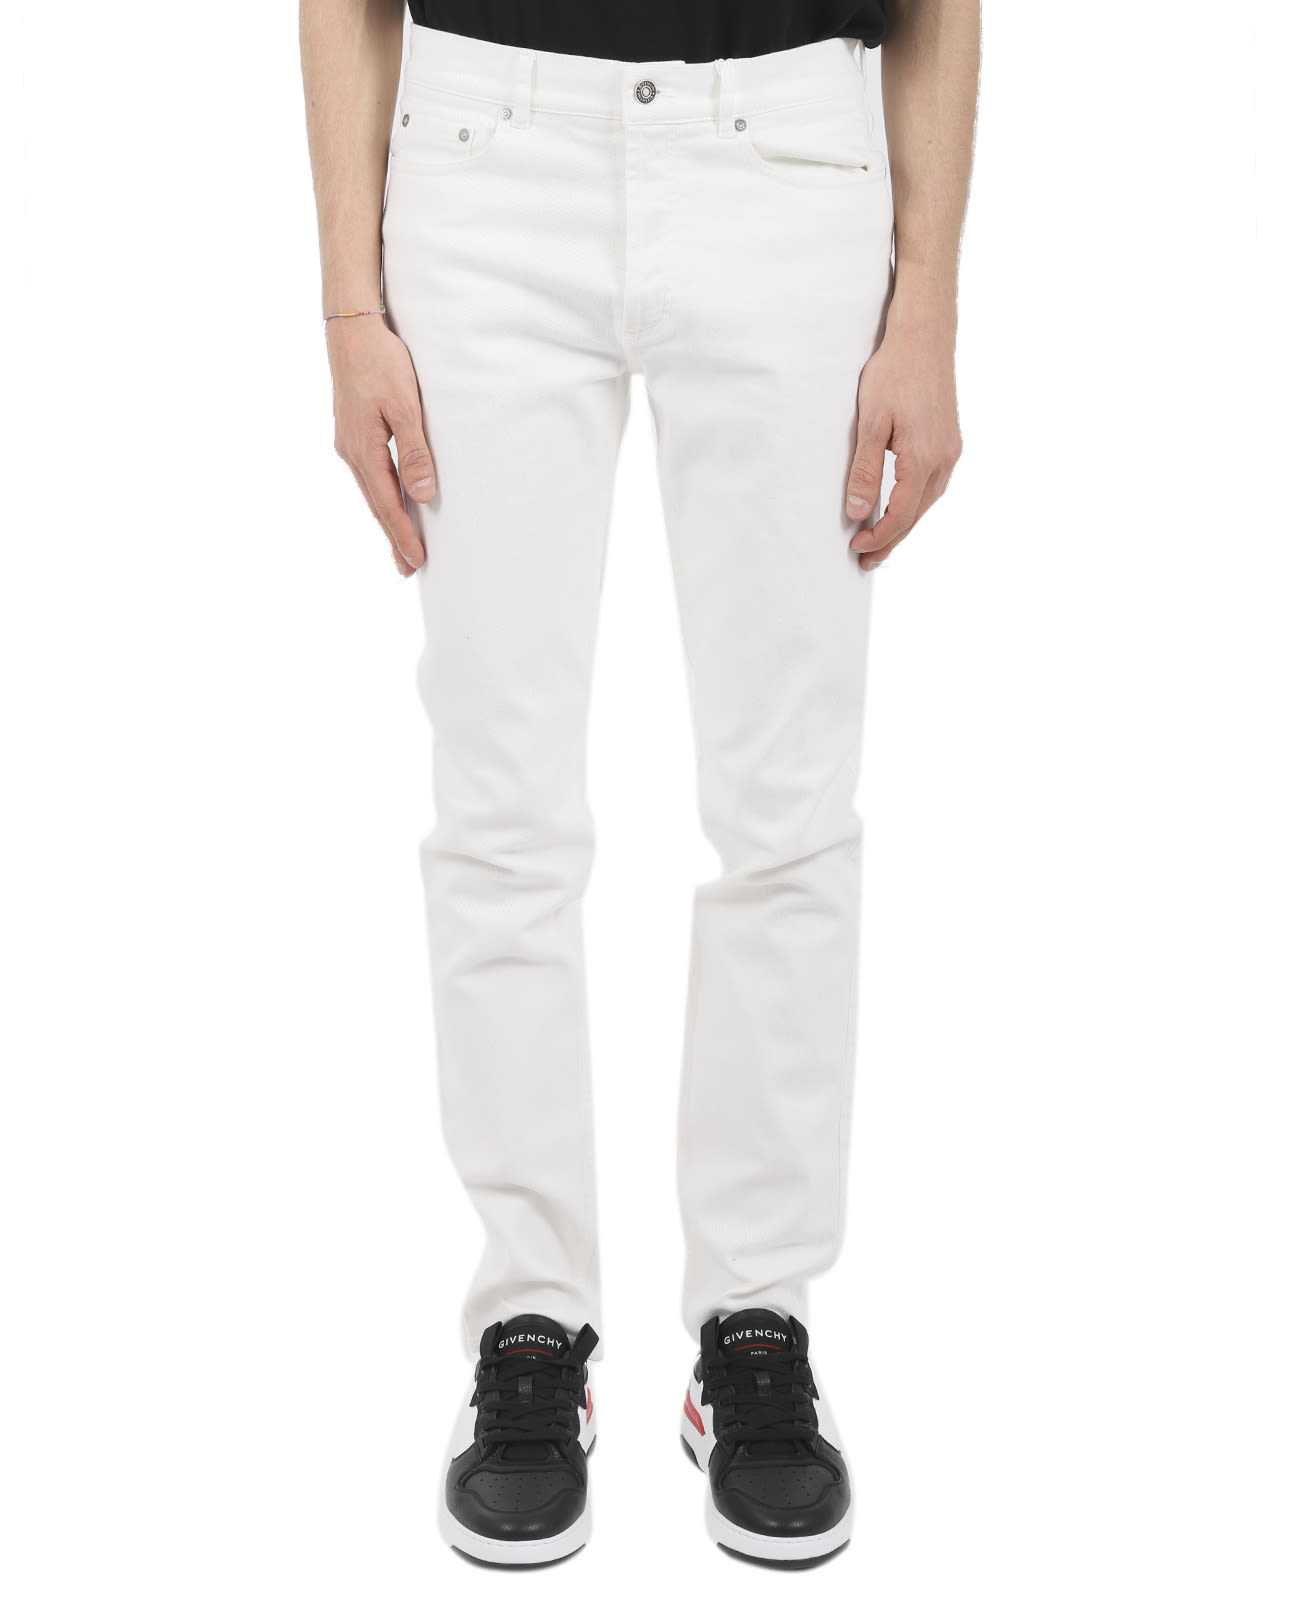 GIVENCHY WHITE JEANS,11292805